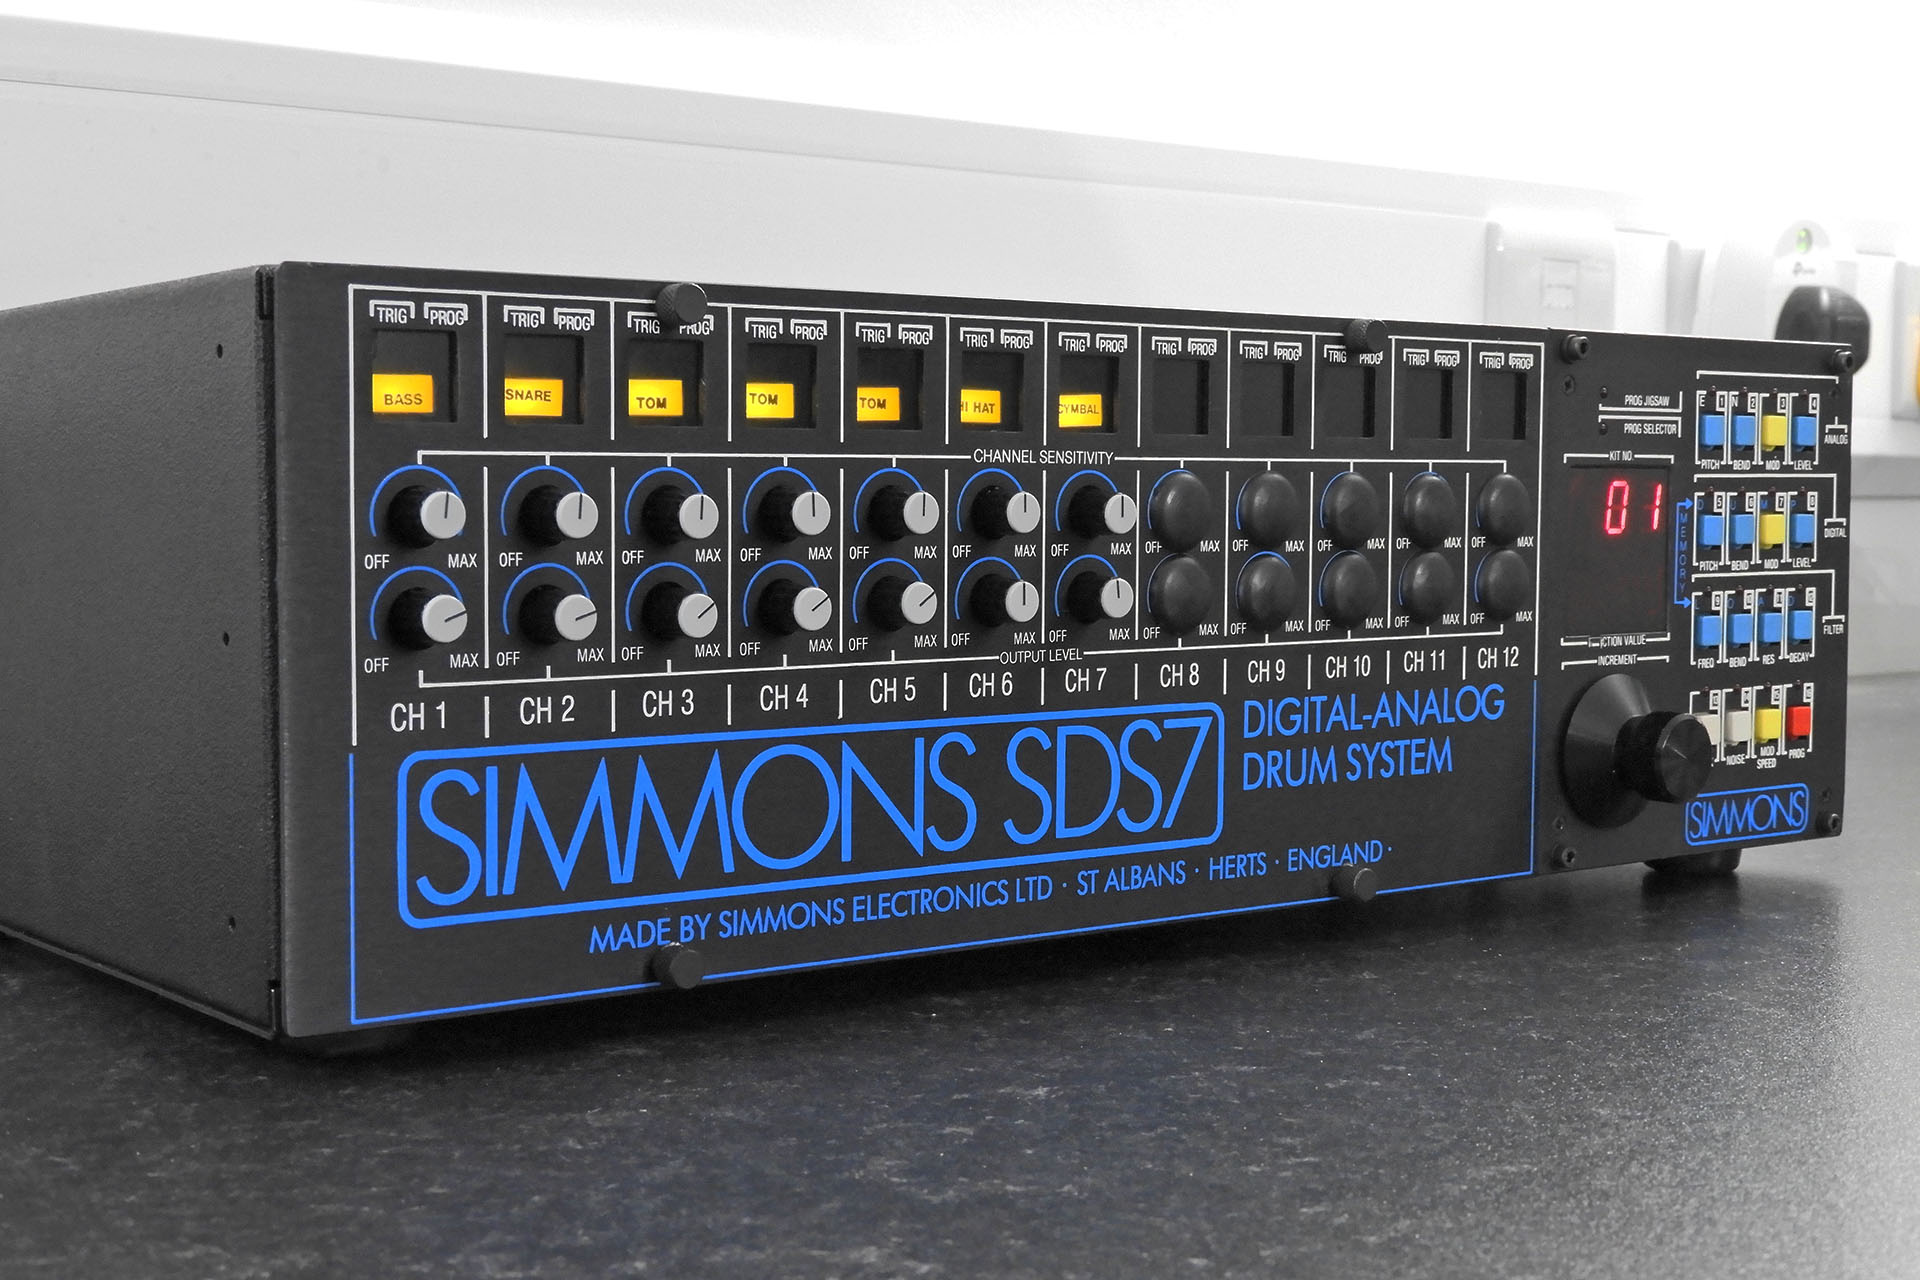 Simmons SDS7 arrived just as I came out of COVID